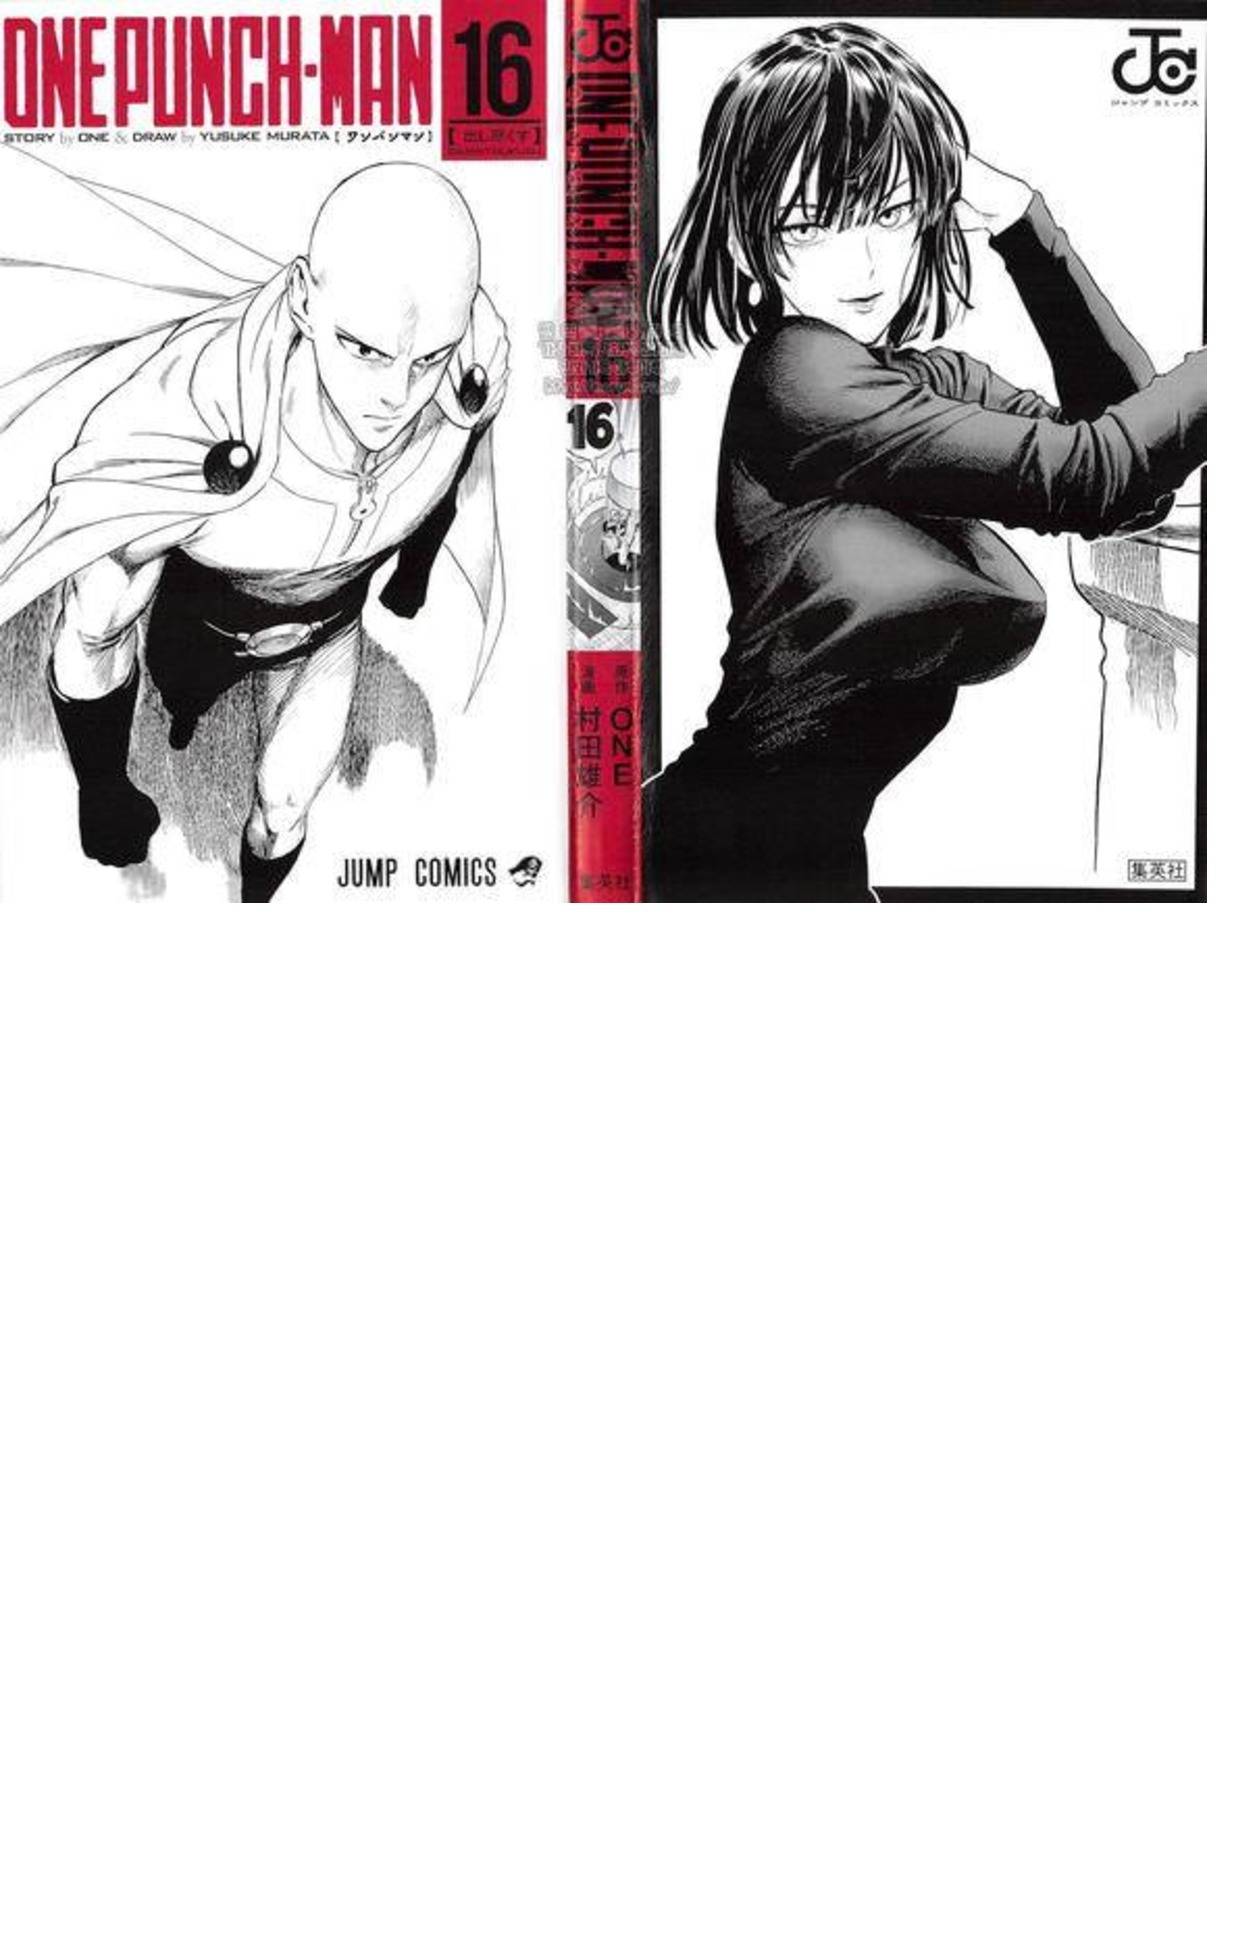 One Punch Man, Chapter 84.1 Volume 16 Extras image 15